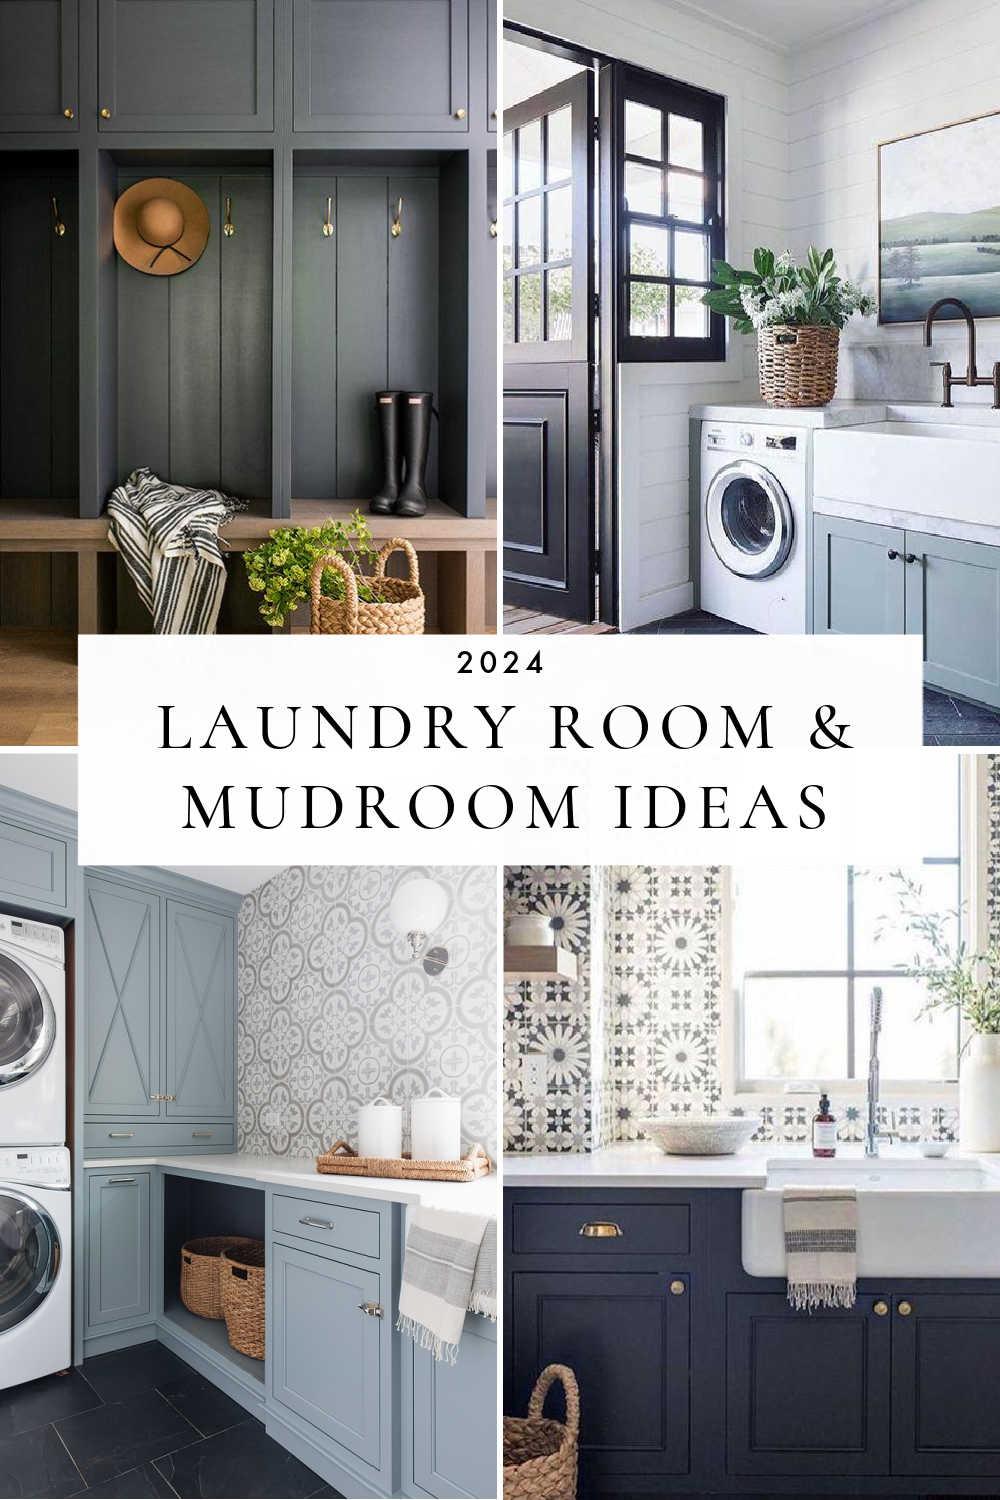 Stylish Laundry Room and Mudroom Ideas for 2024 – jane at home